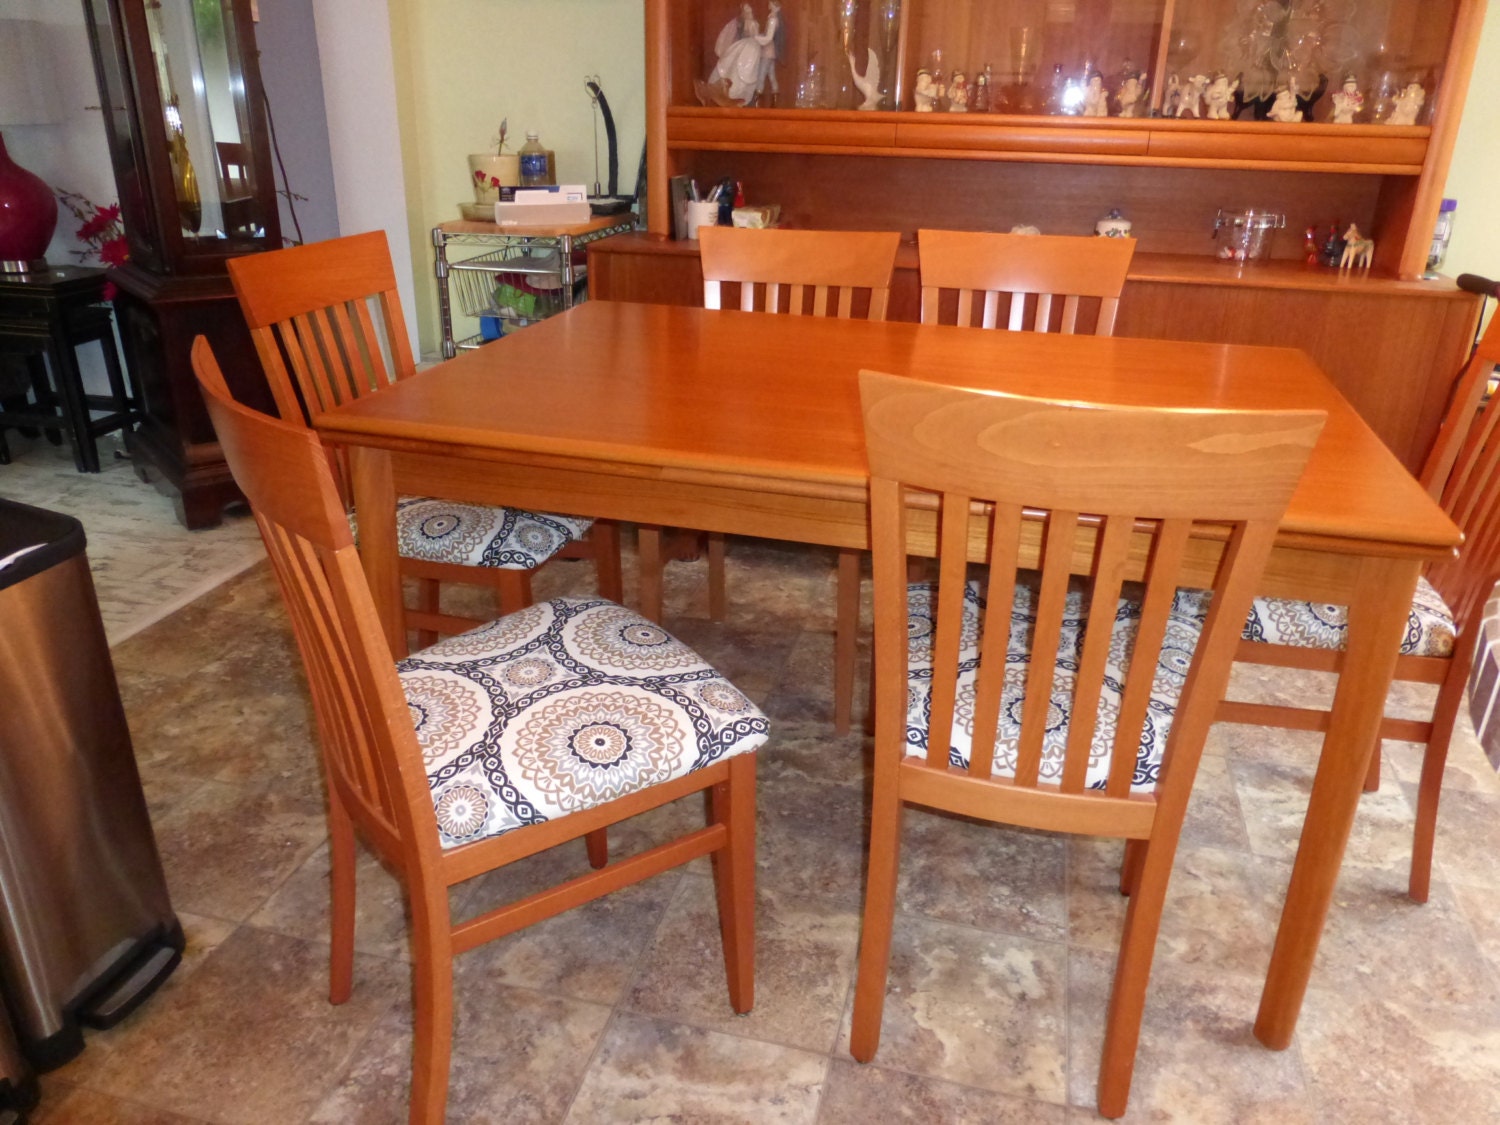 Teak Dining Table And Chairs: A Match Made In Heaven